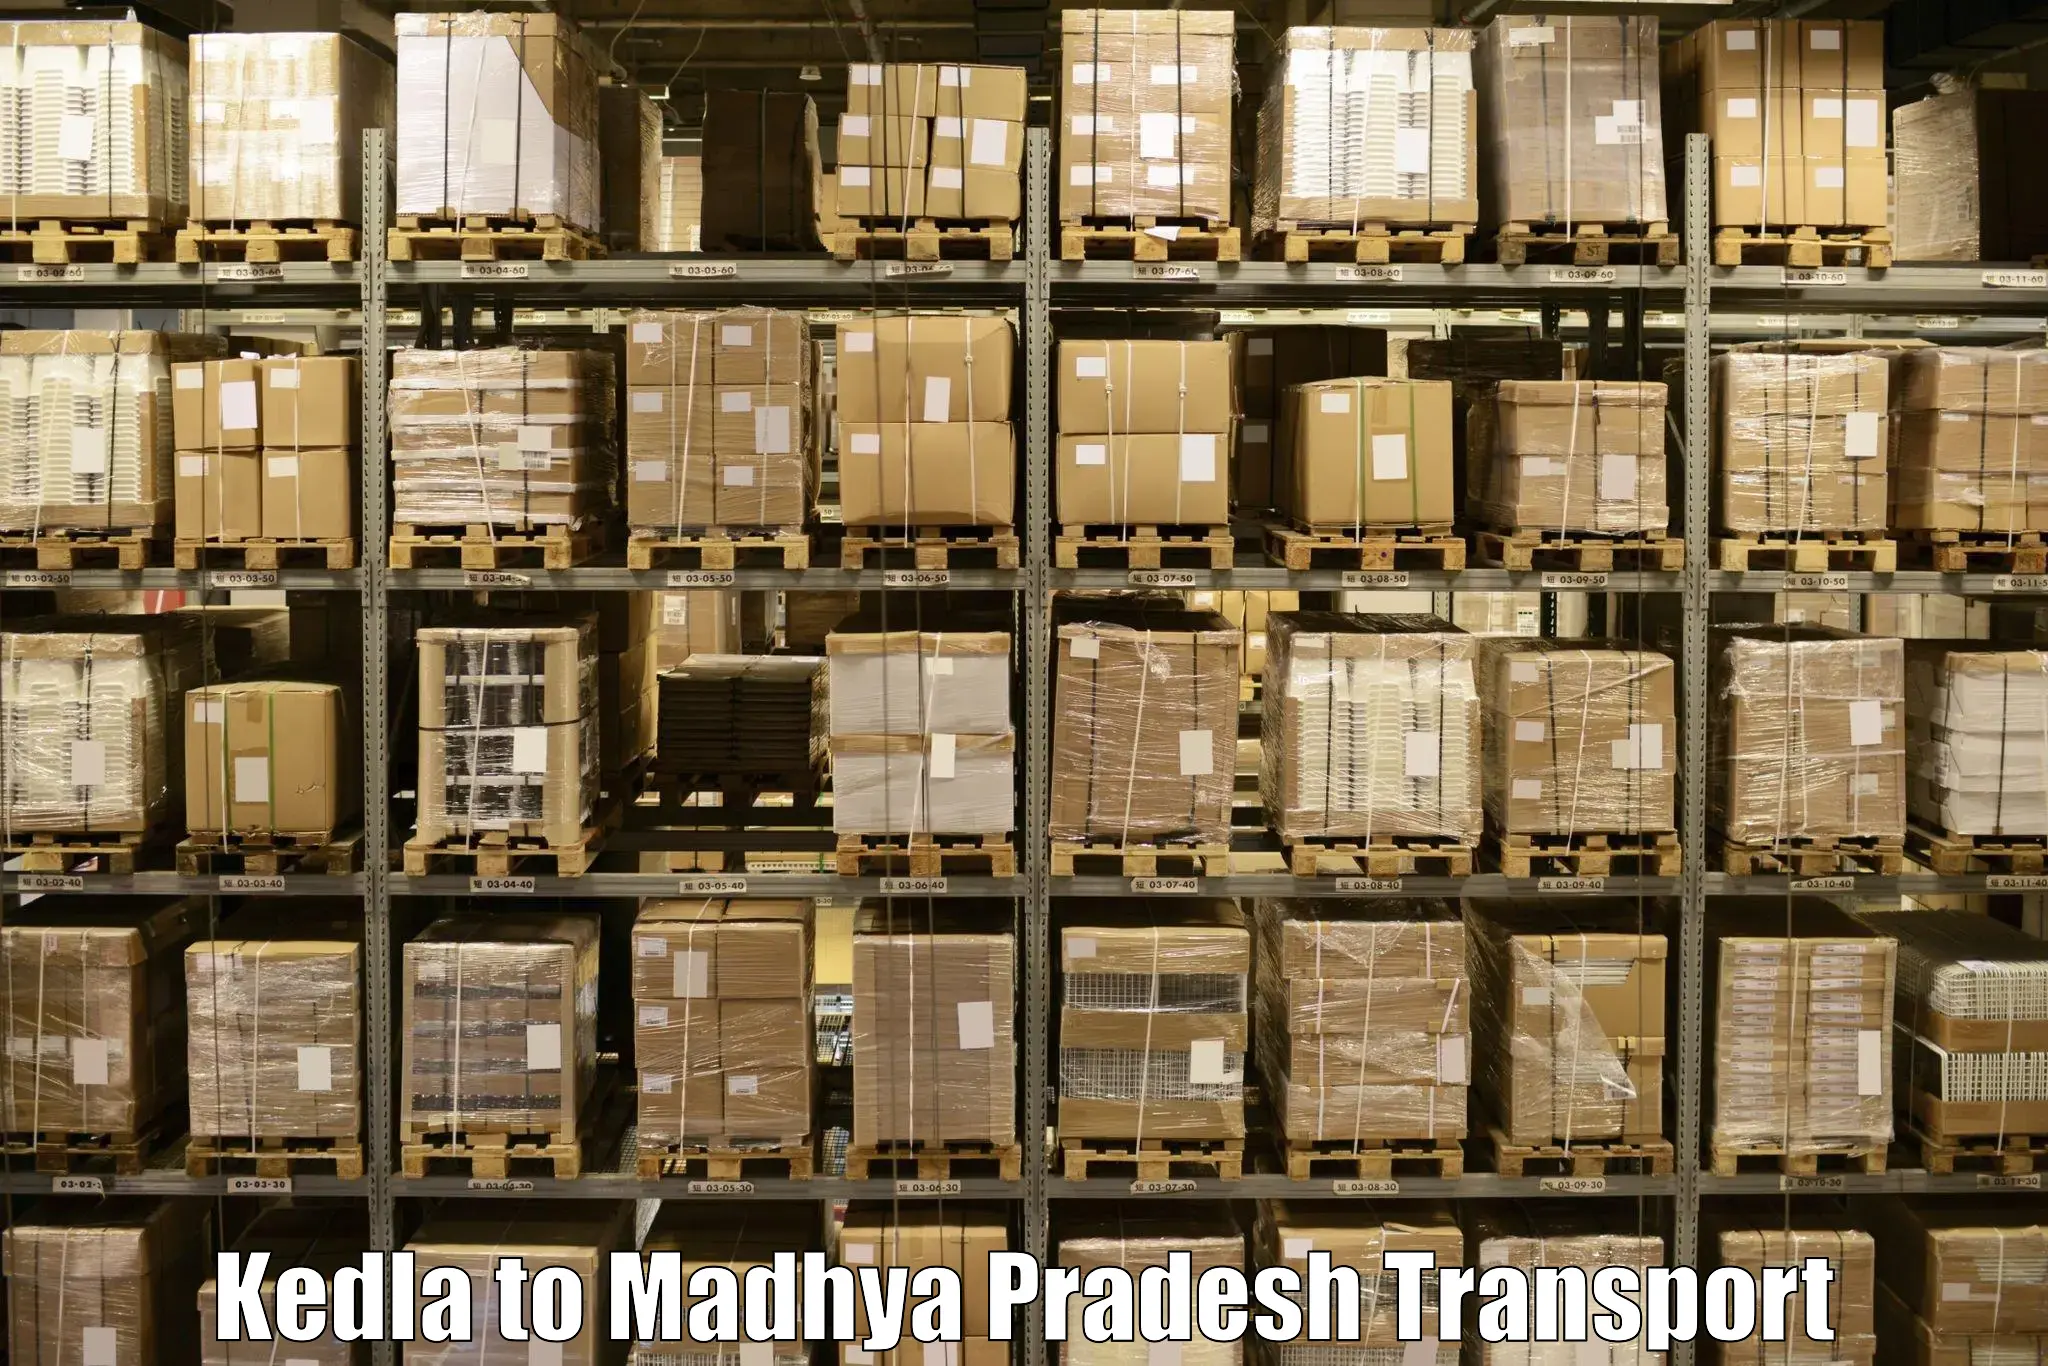 Express transport services Kedla to Bhopal